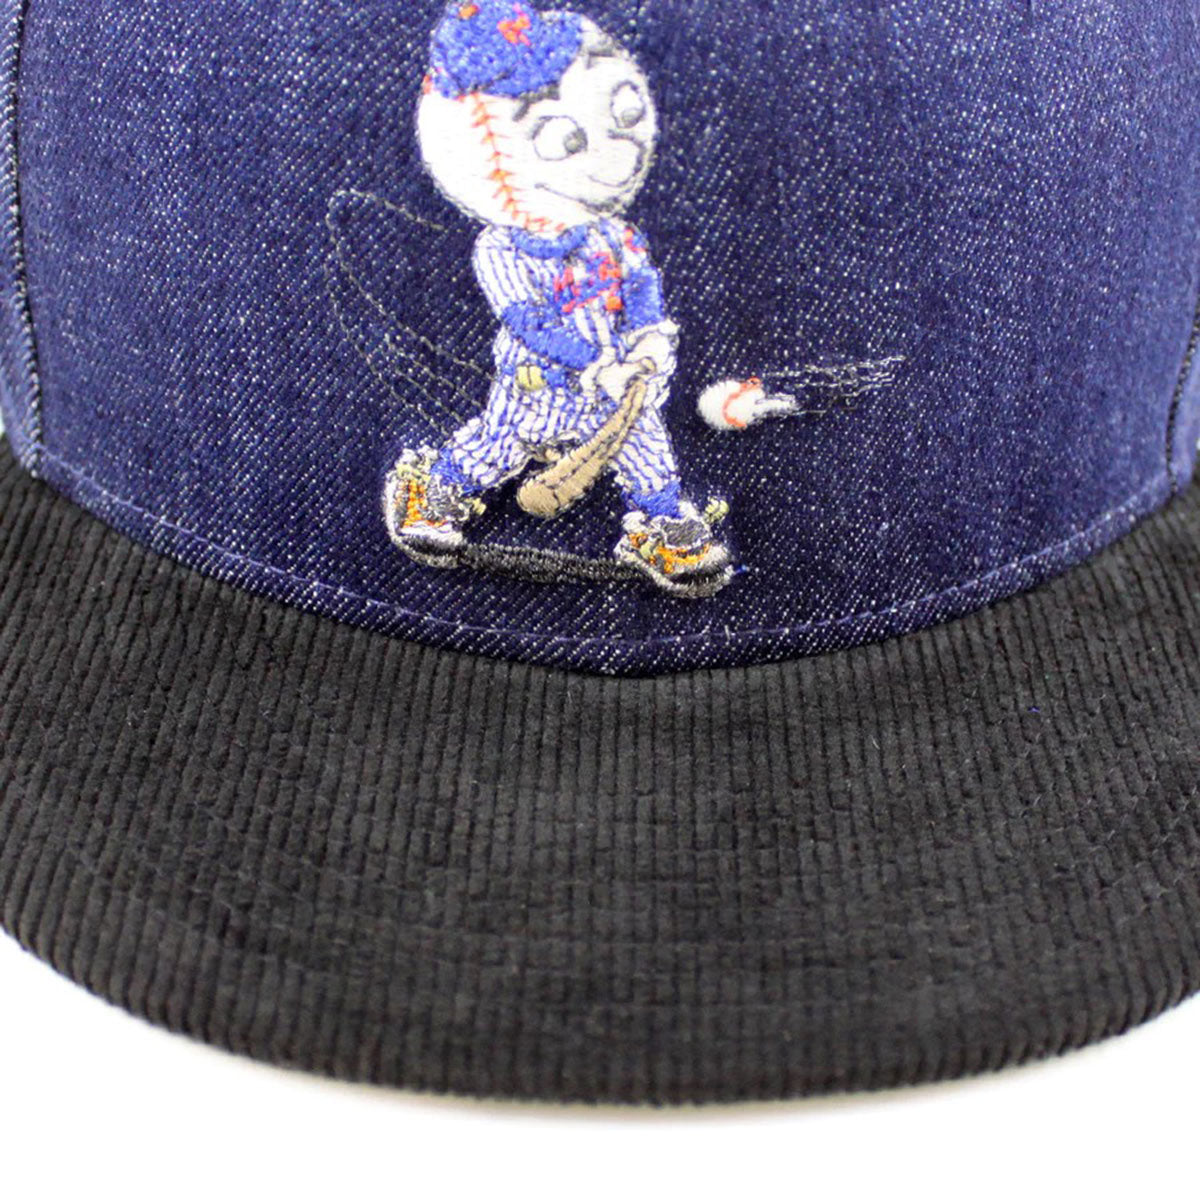 NEW ERA New York Mets - 59FIFTY OLD TIMERS DAY PATCH NAVY DENIM